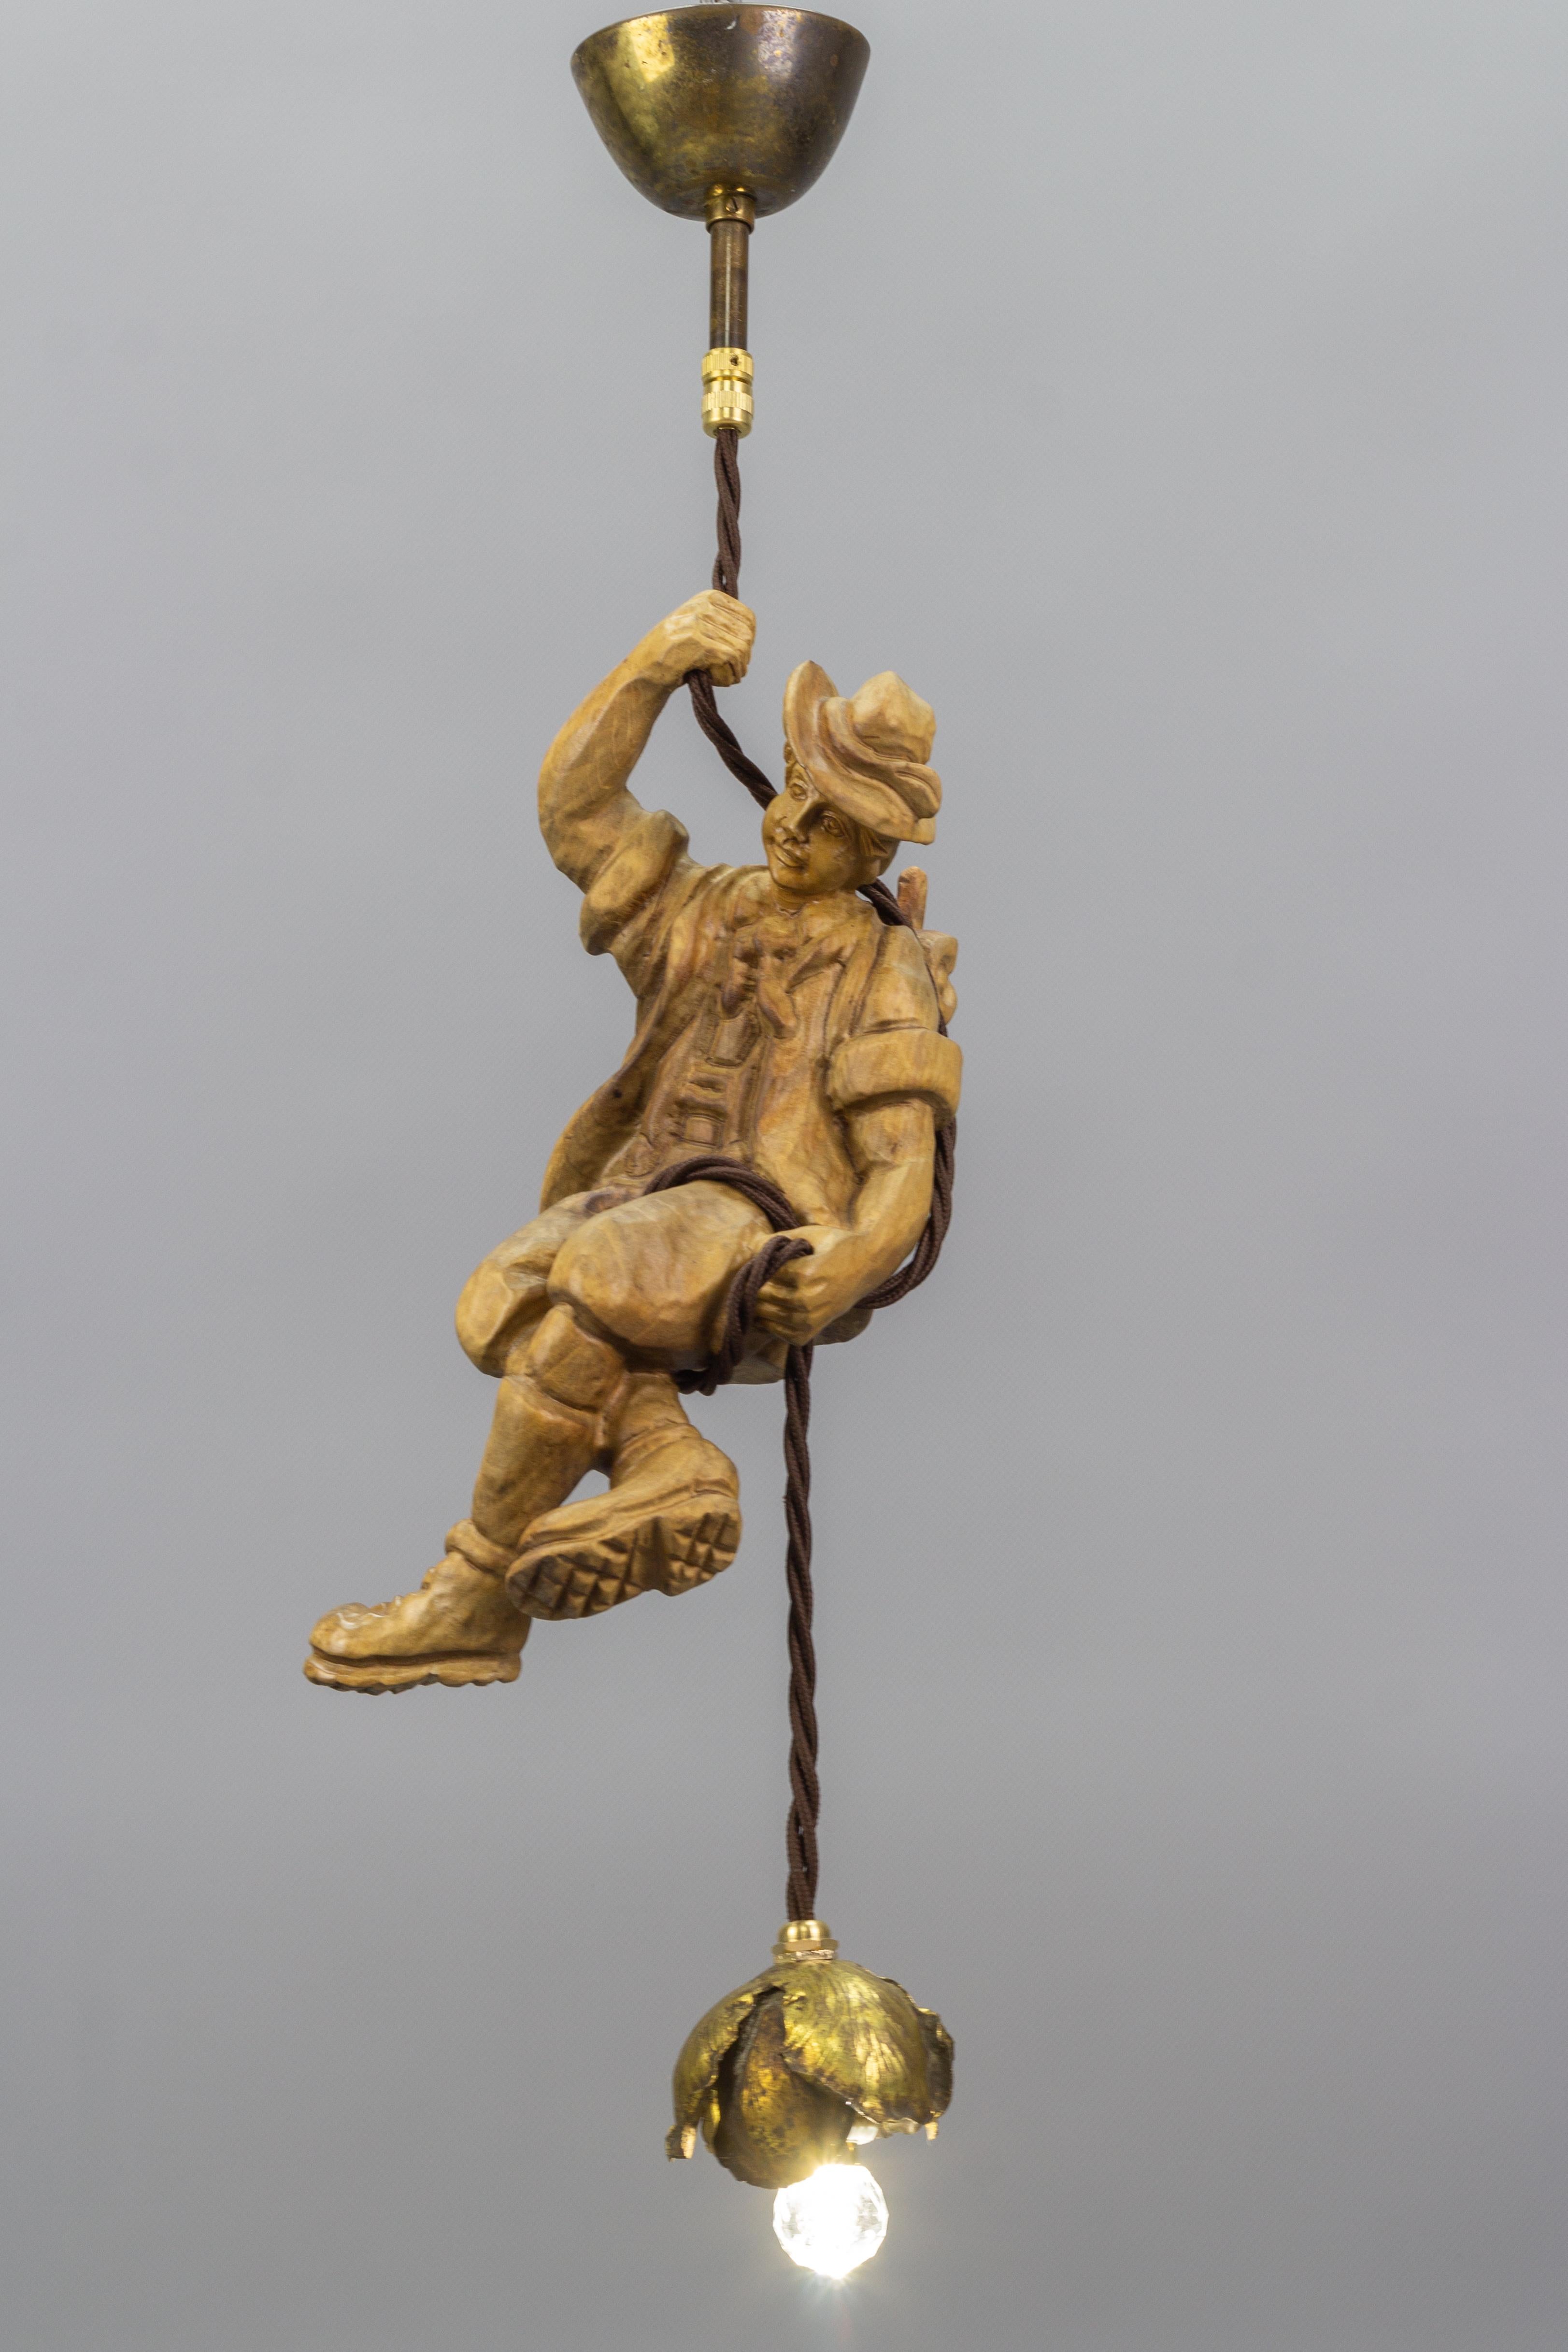 Black Forest Hanging Brass Light Fixture with a Wooden Figure of a Mountain Climber For Sale